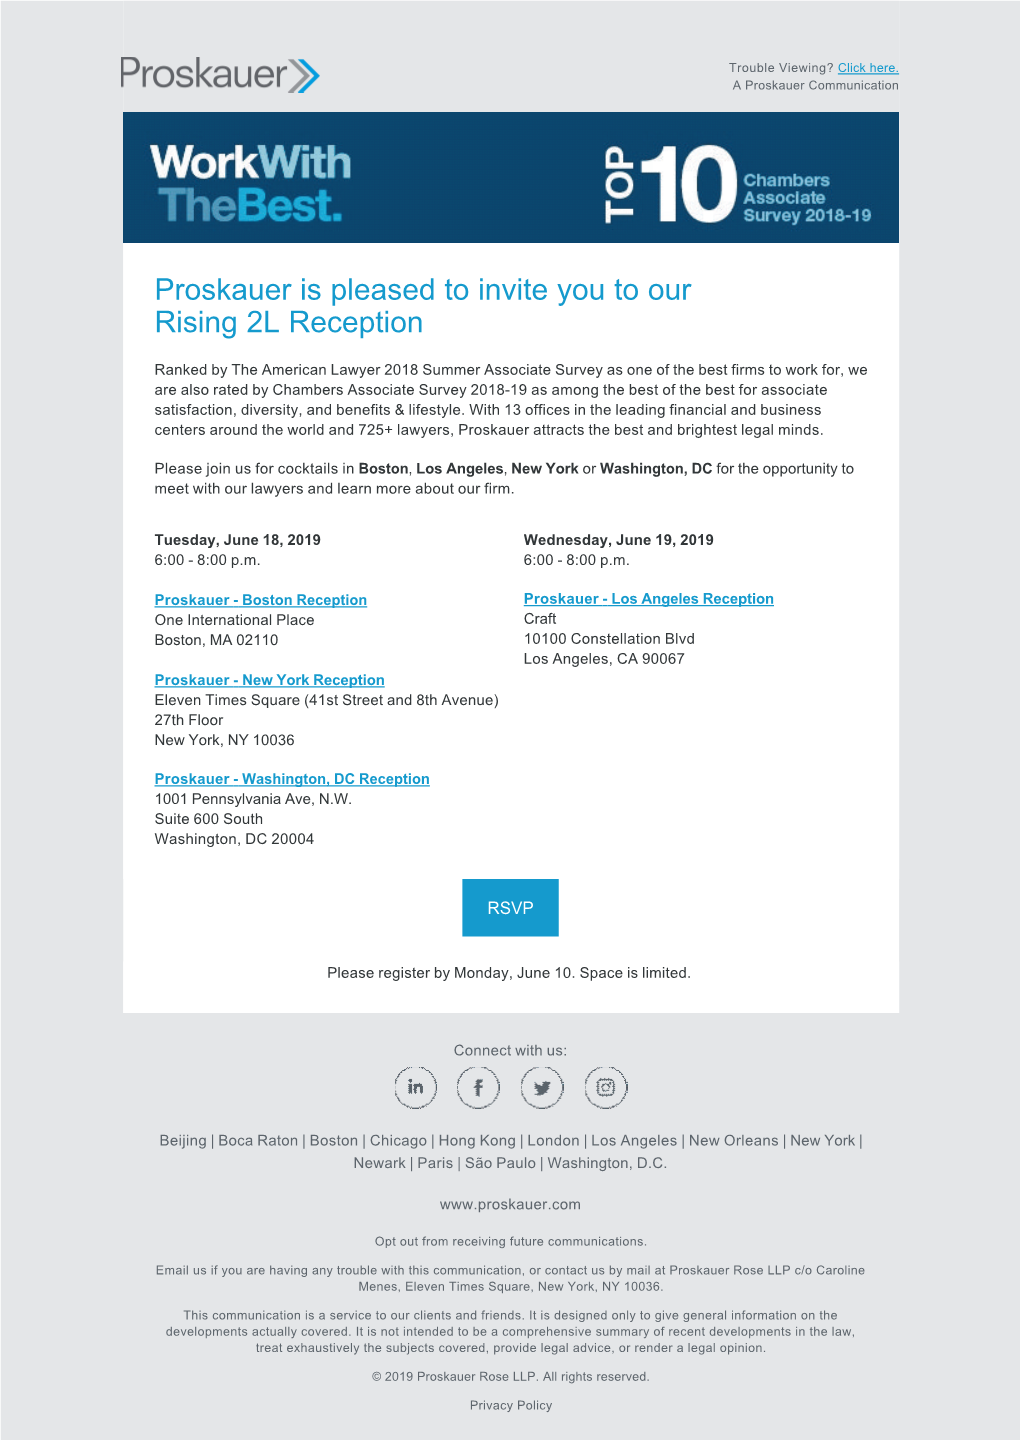 Proskauer Is Pleased to Invite You to Our Rising 2L Reception